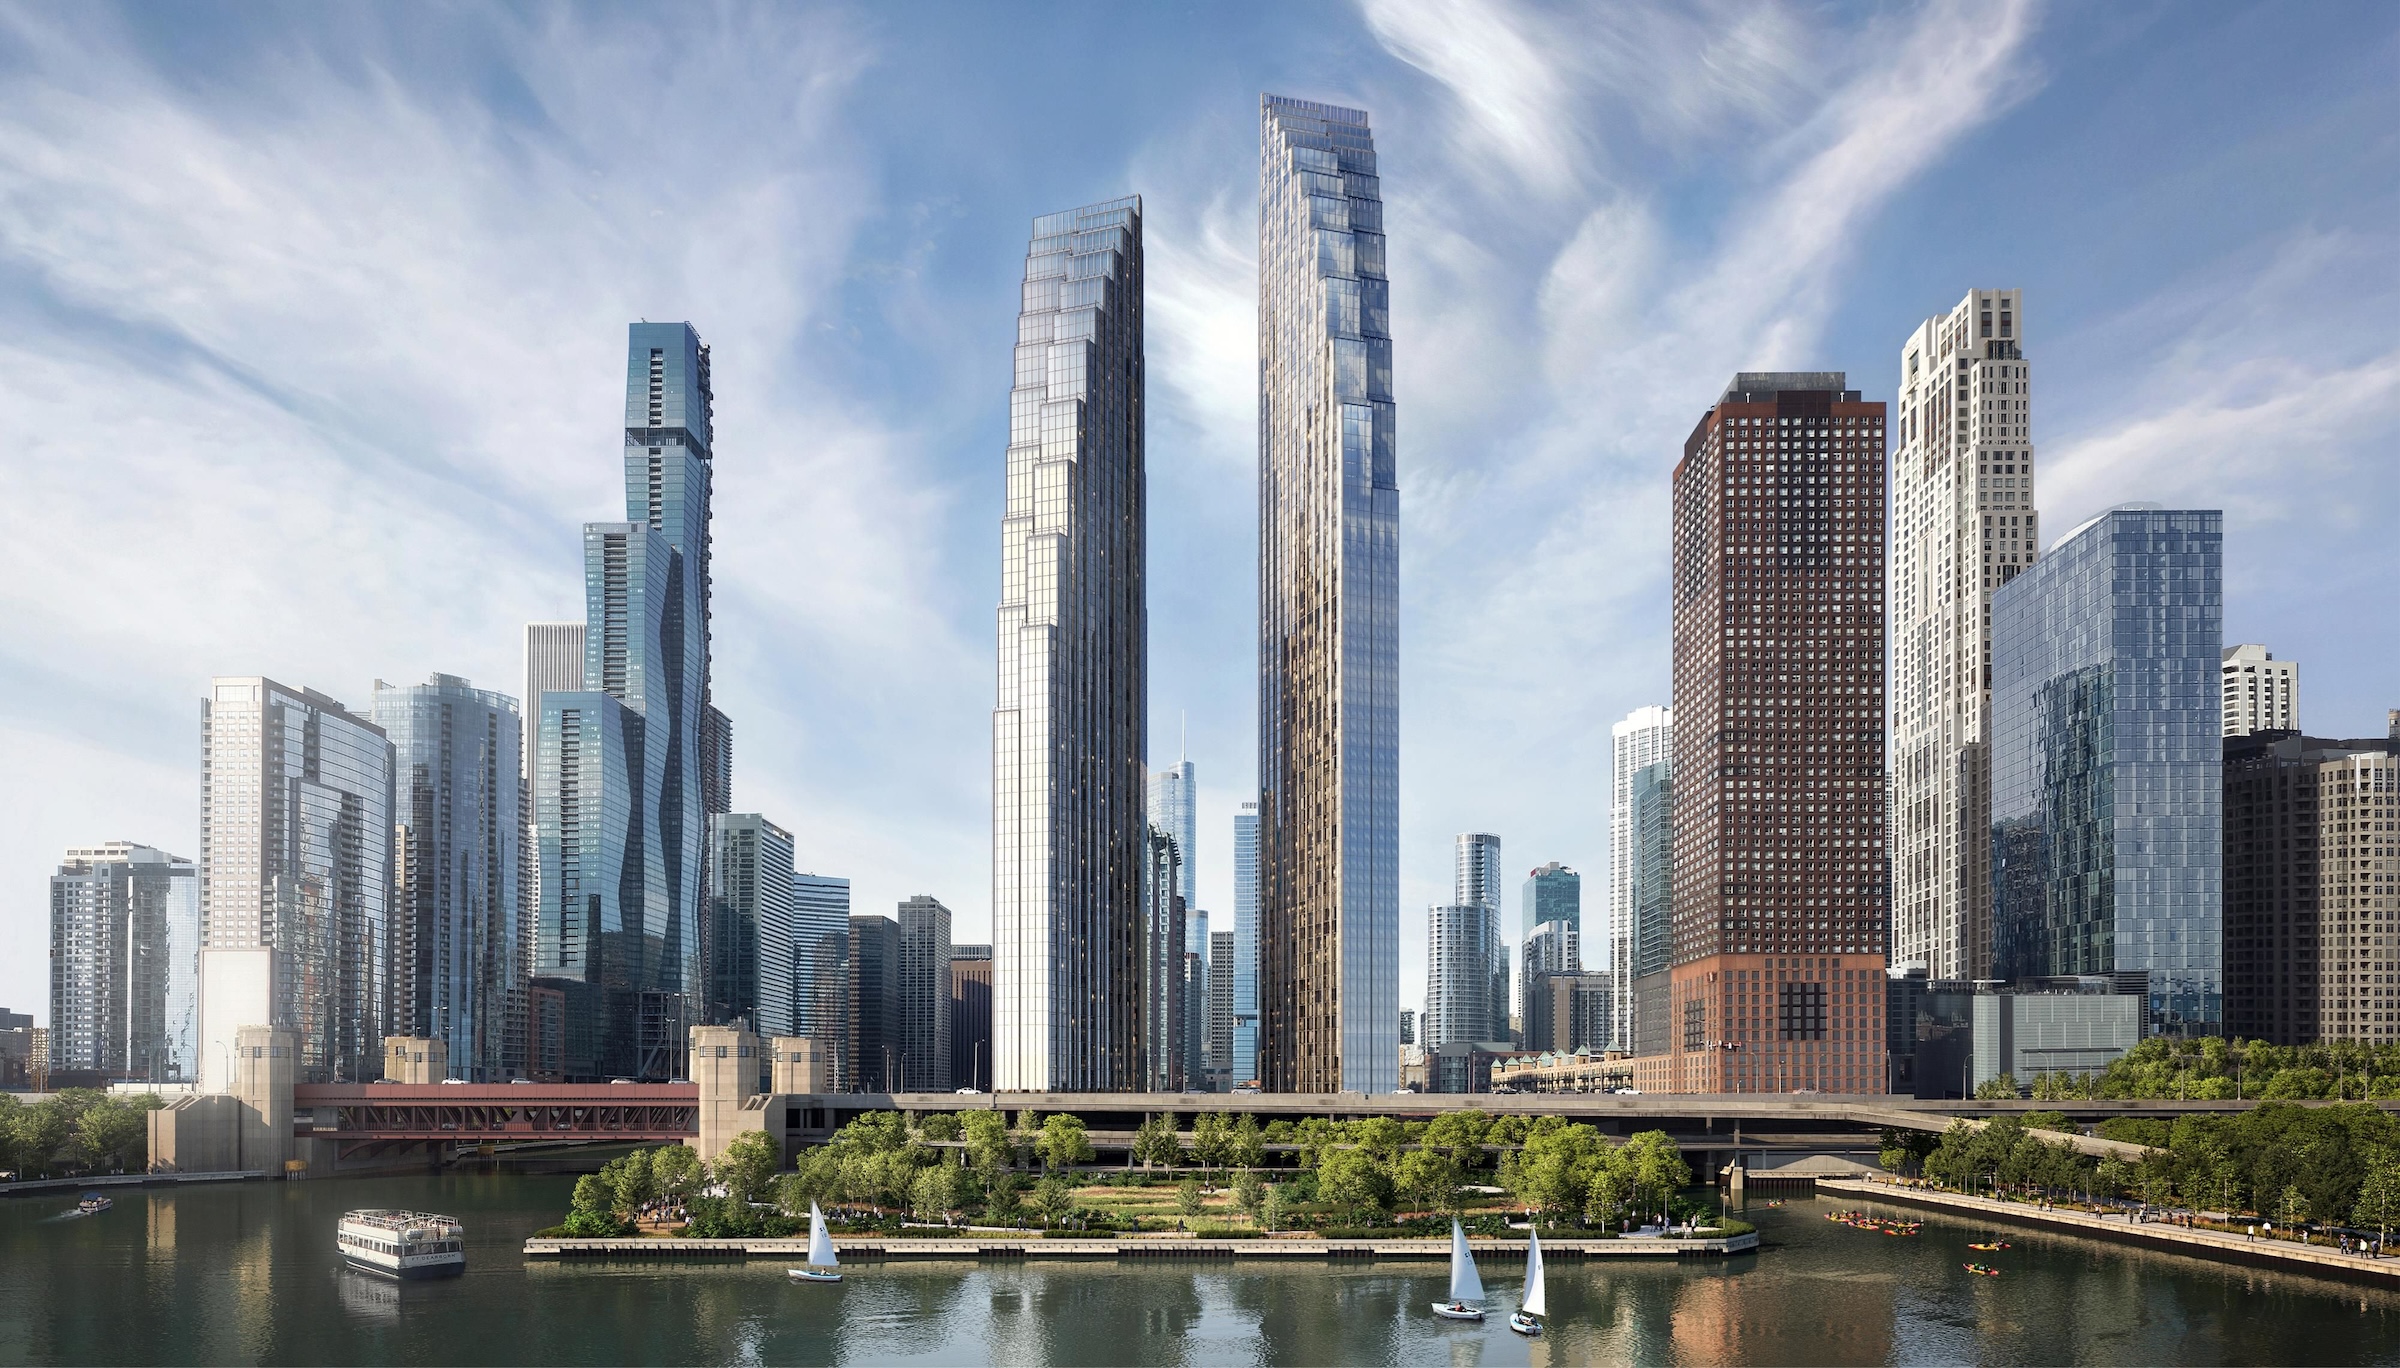 Chicago’s long-vacant Spire site will be home to the two-tower 400 Lake Shore residential development, by Related Midwest and SOM - Rendering courtesy Related Midwest, Skidmore Owings Merrill